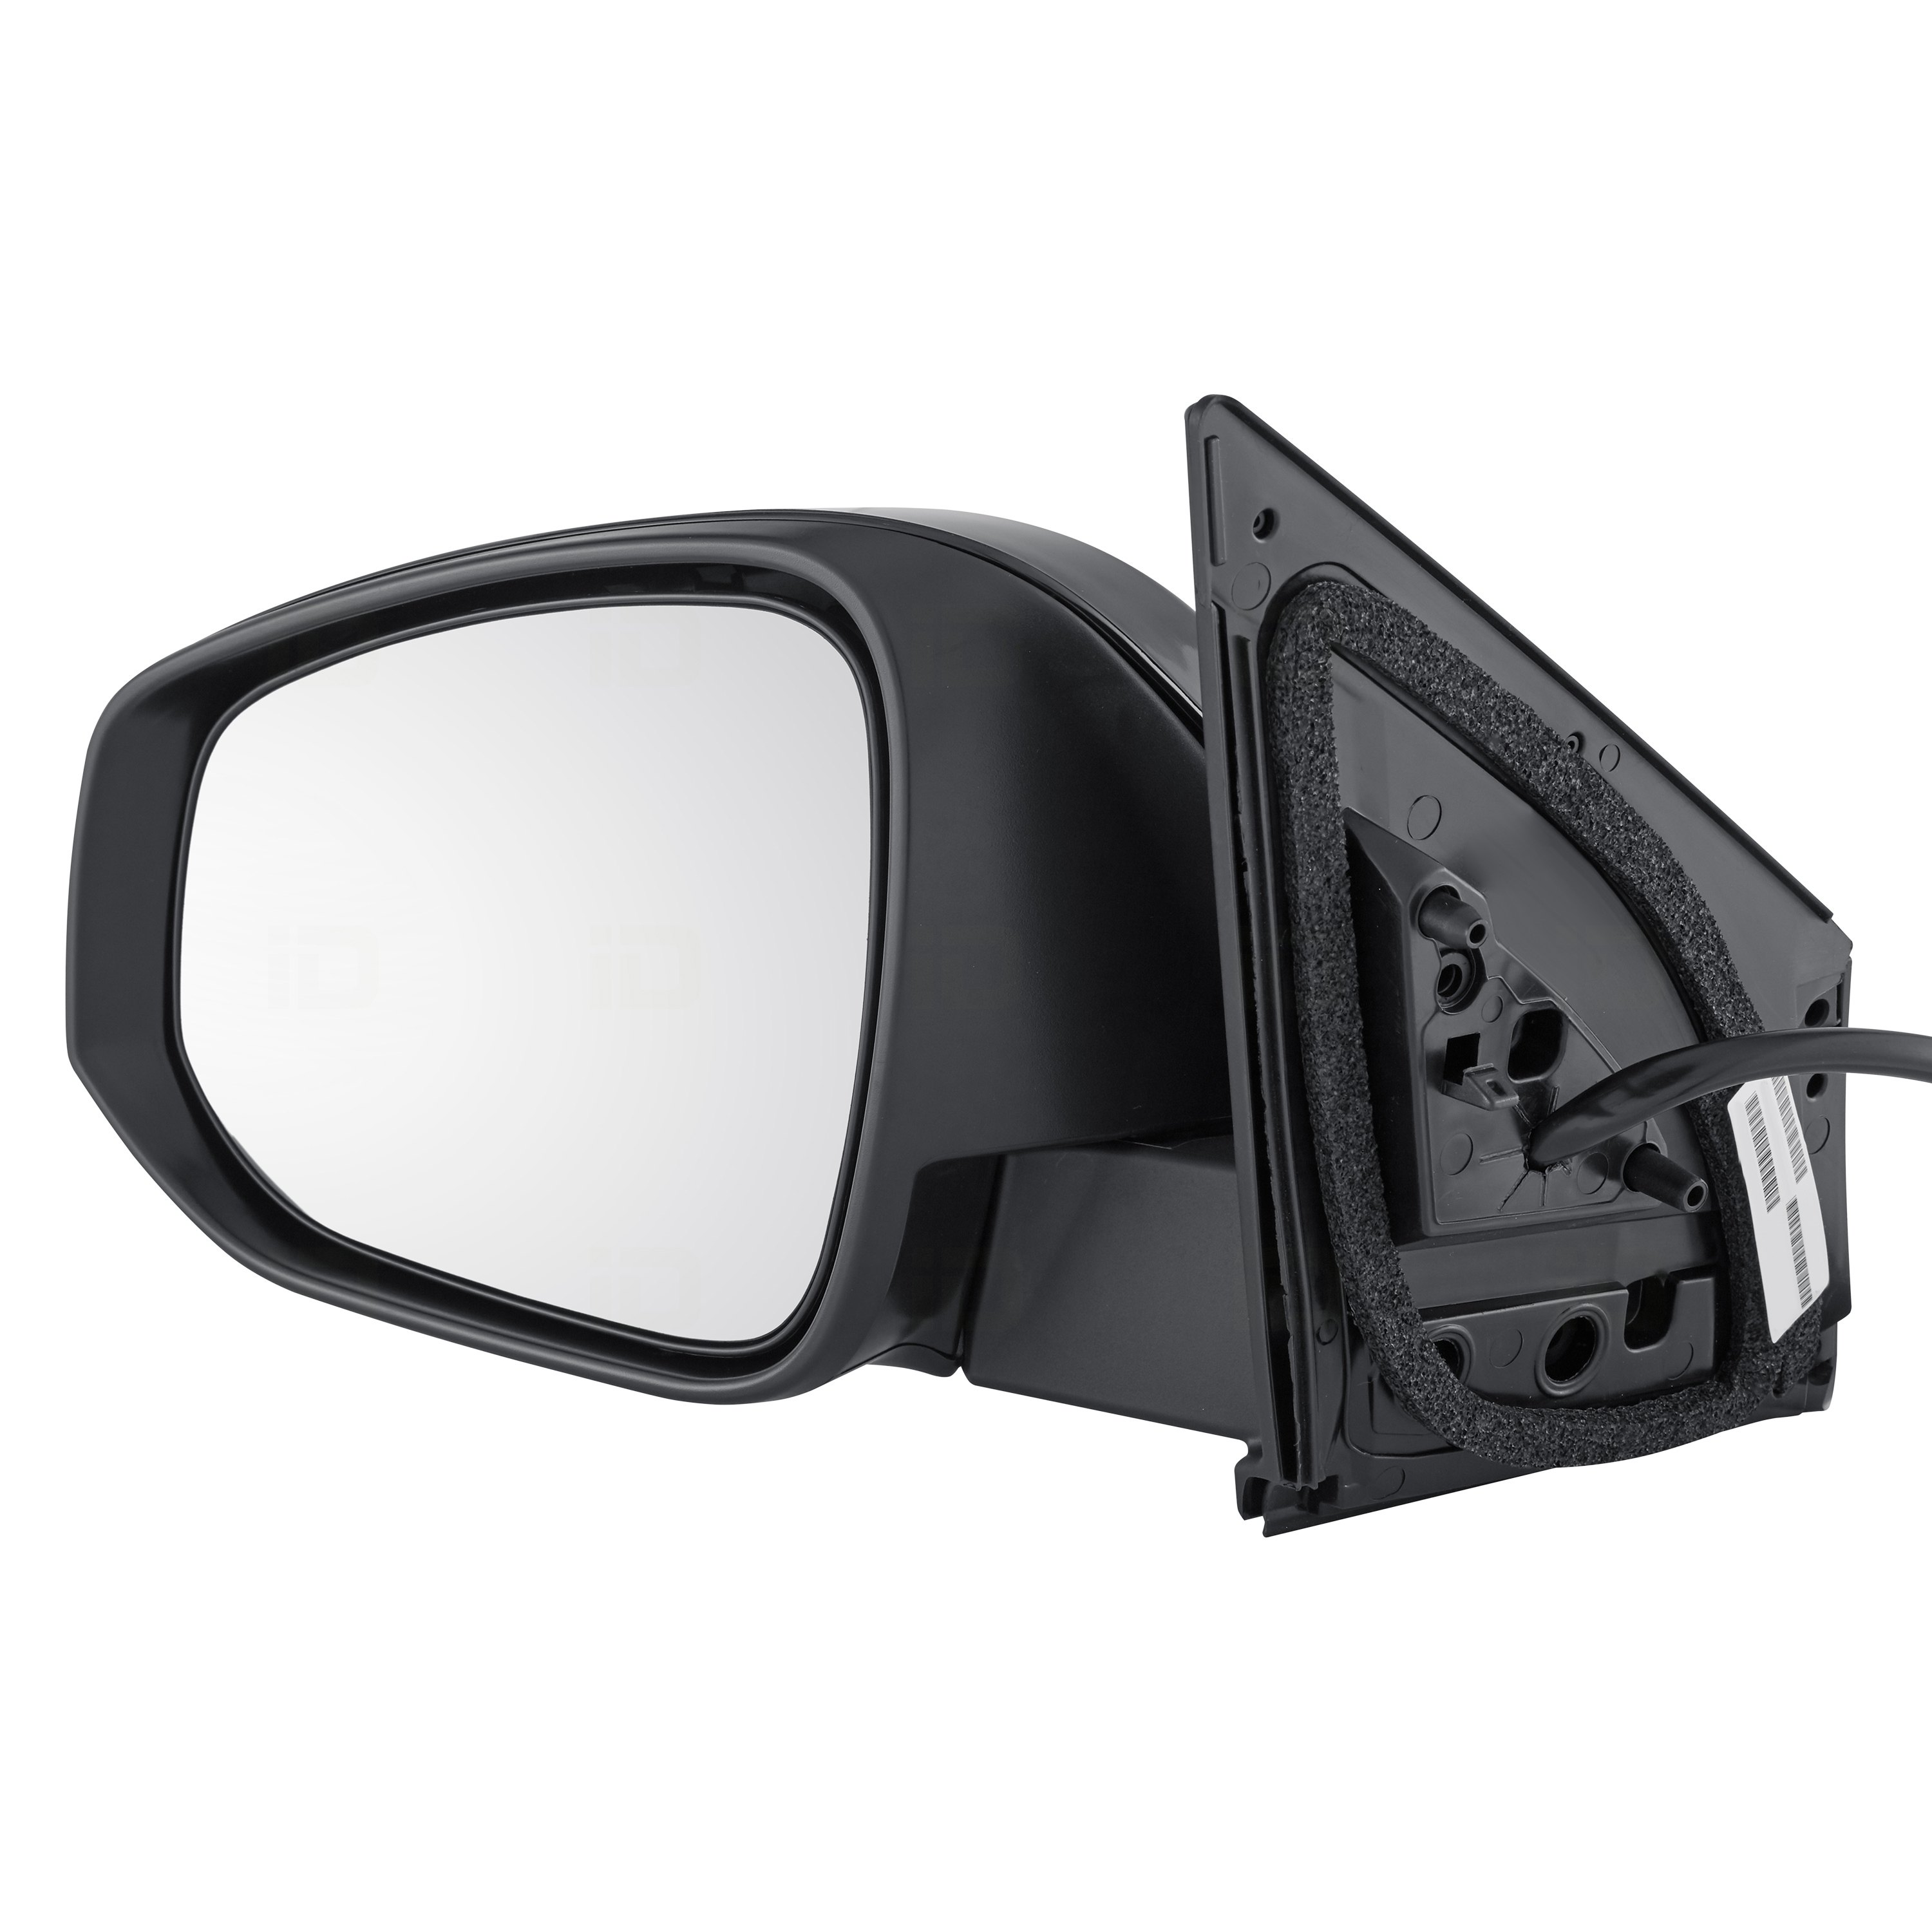 For Toyota RAV4 2014-2015 Replace TO1320362 Driver Side Power View Mirror Heated | eBay Toyota Rav4 2014 Driver Side Mirror Replacement